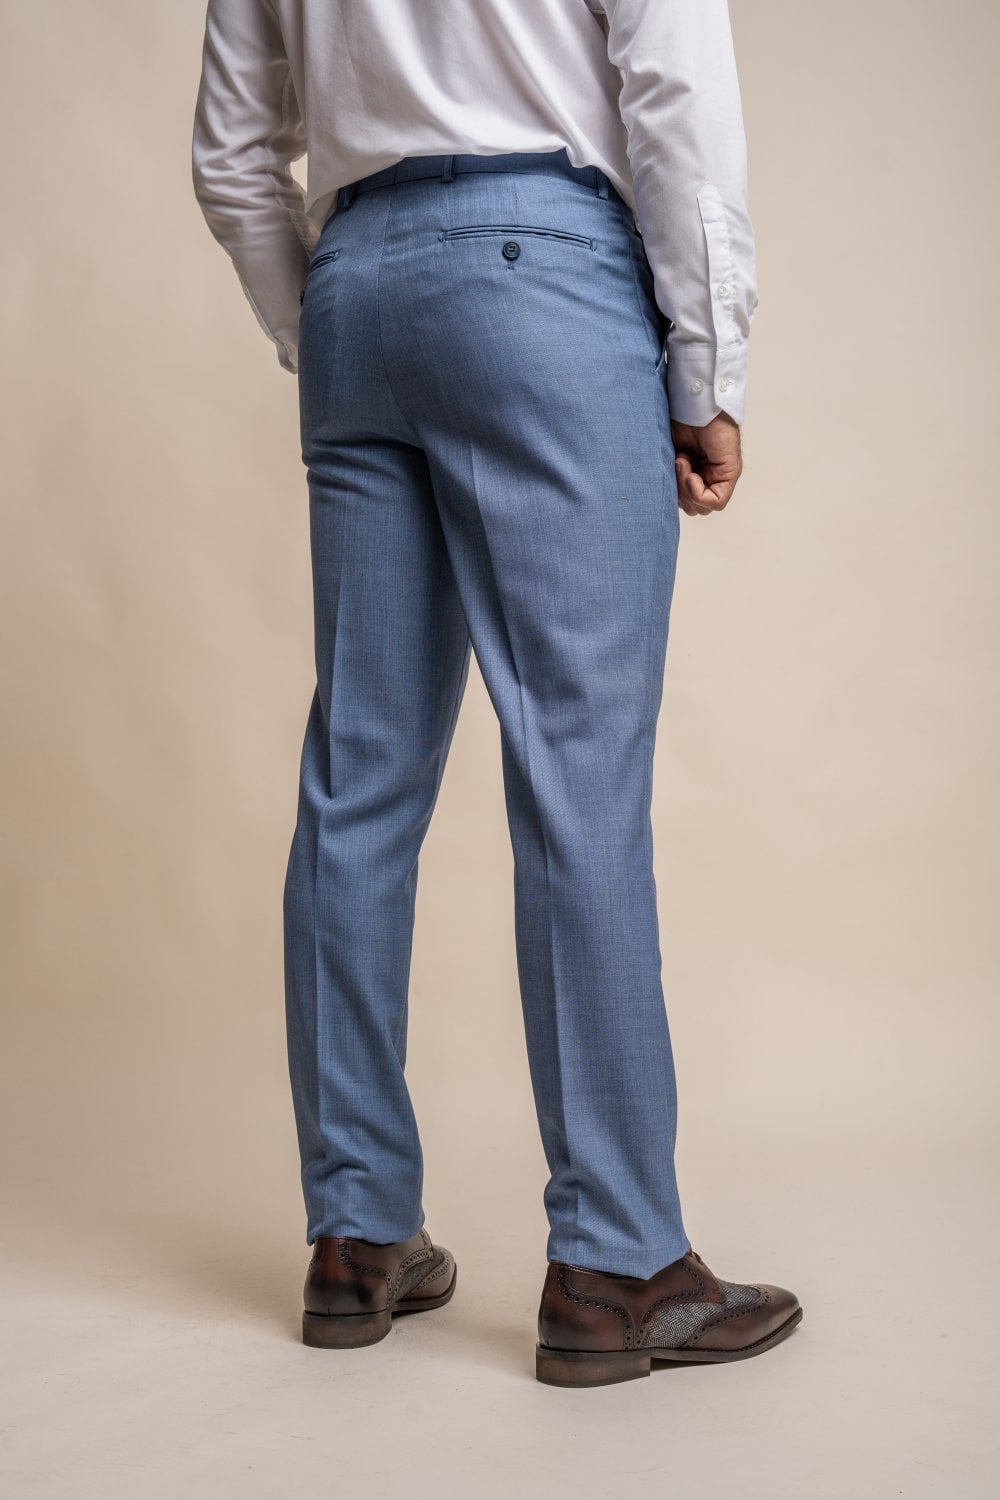 Blue Jay Trousers